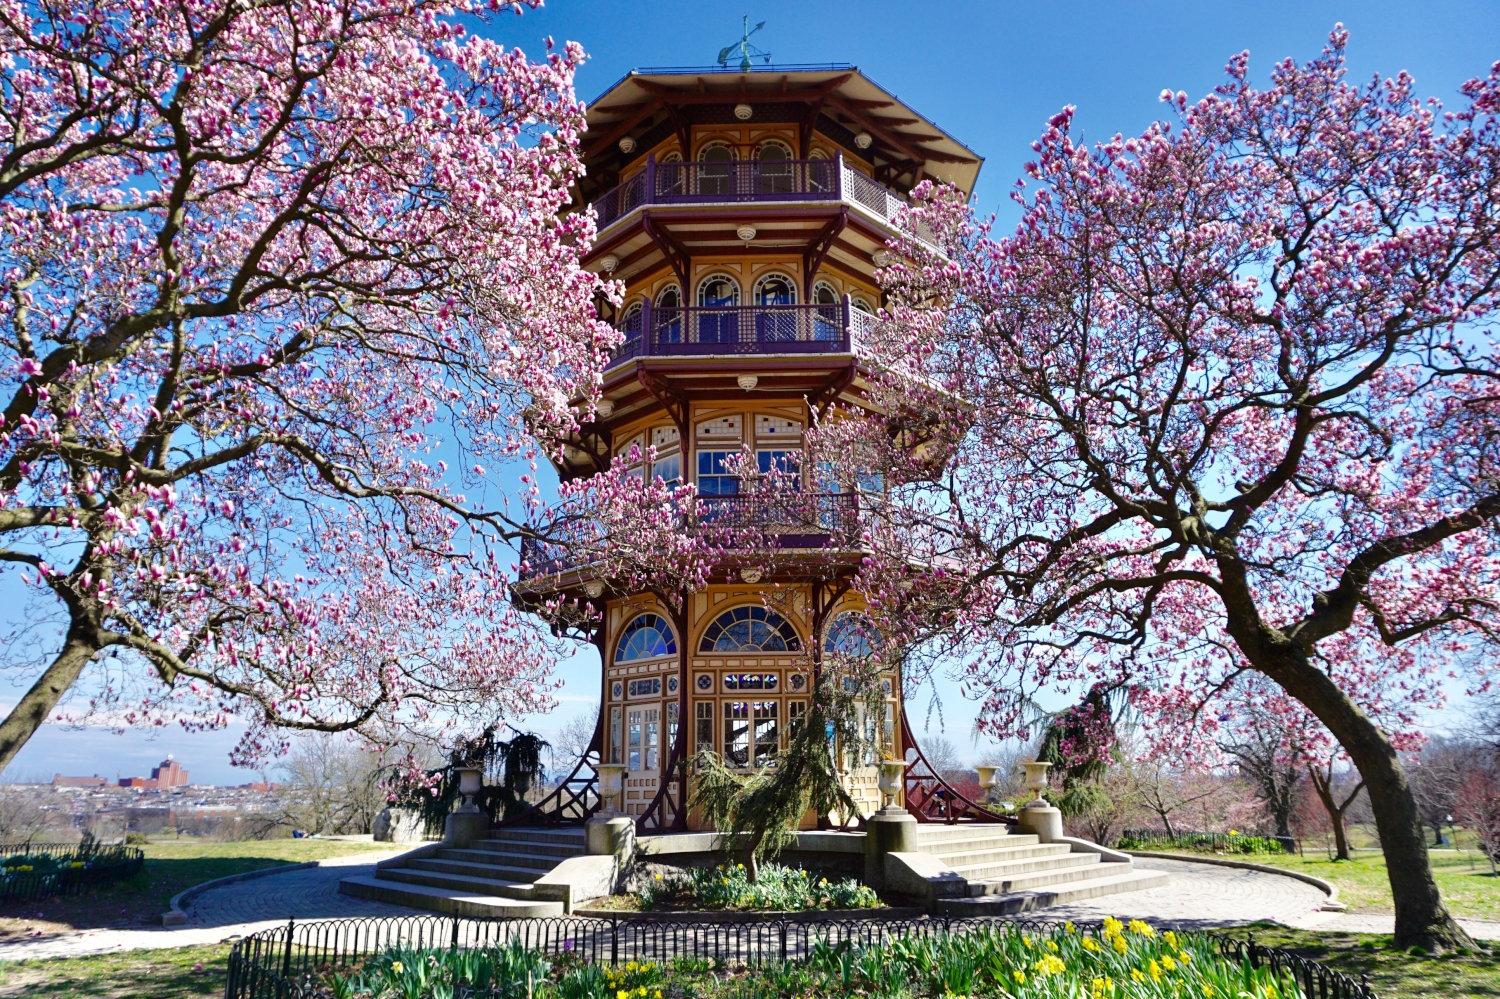 Baltimore Pagoda in Patterson Park flanked by cherry trees in bloom